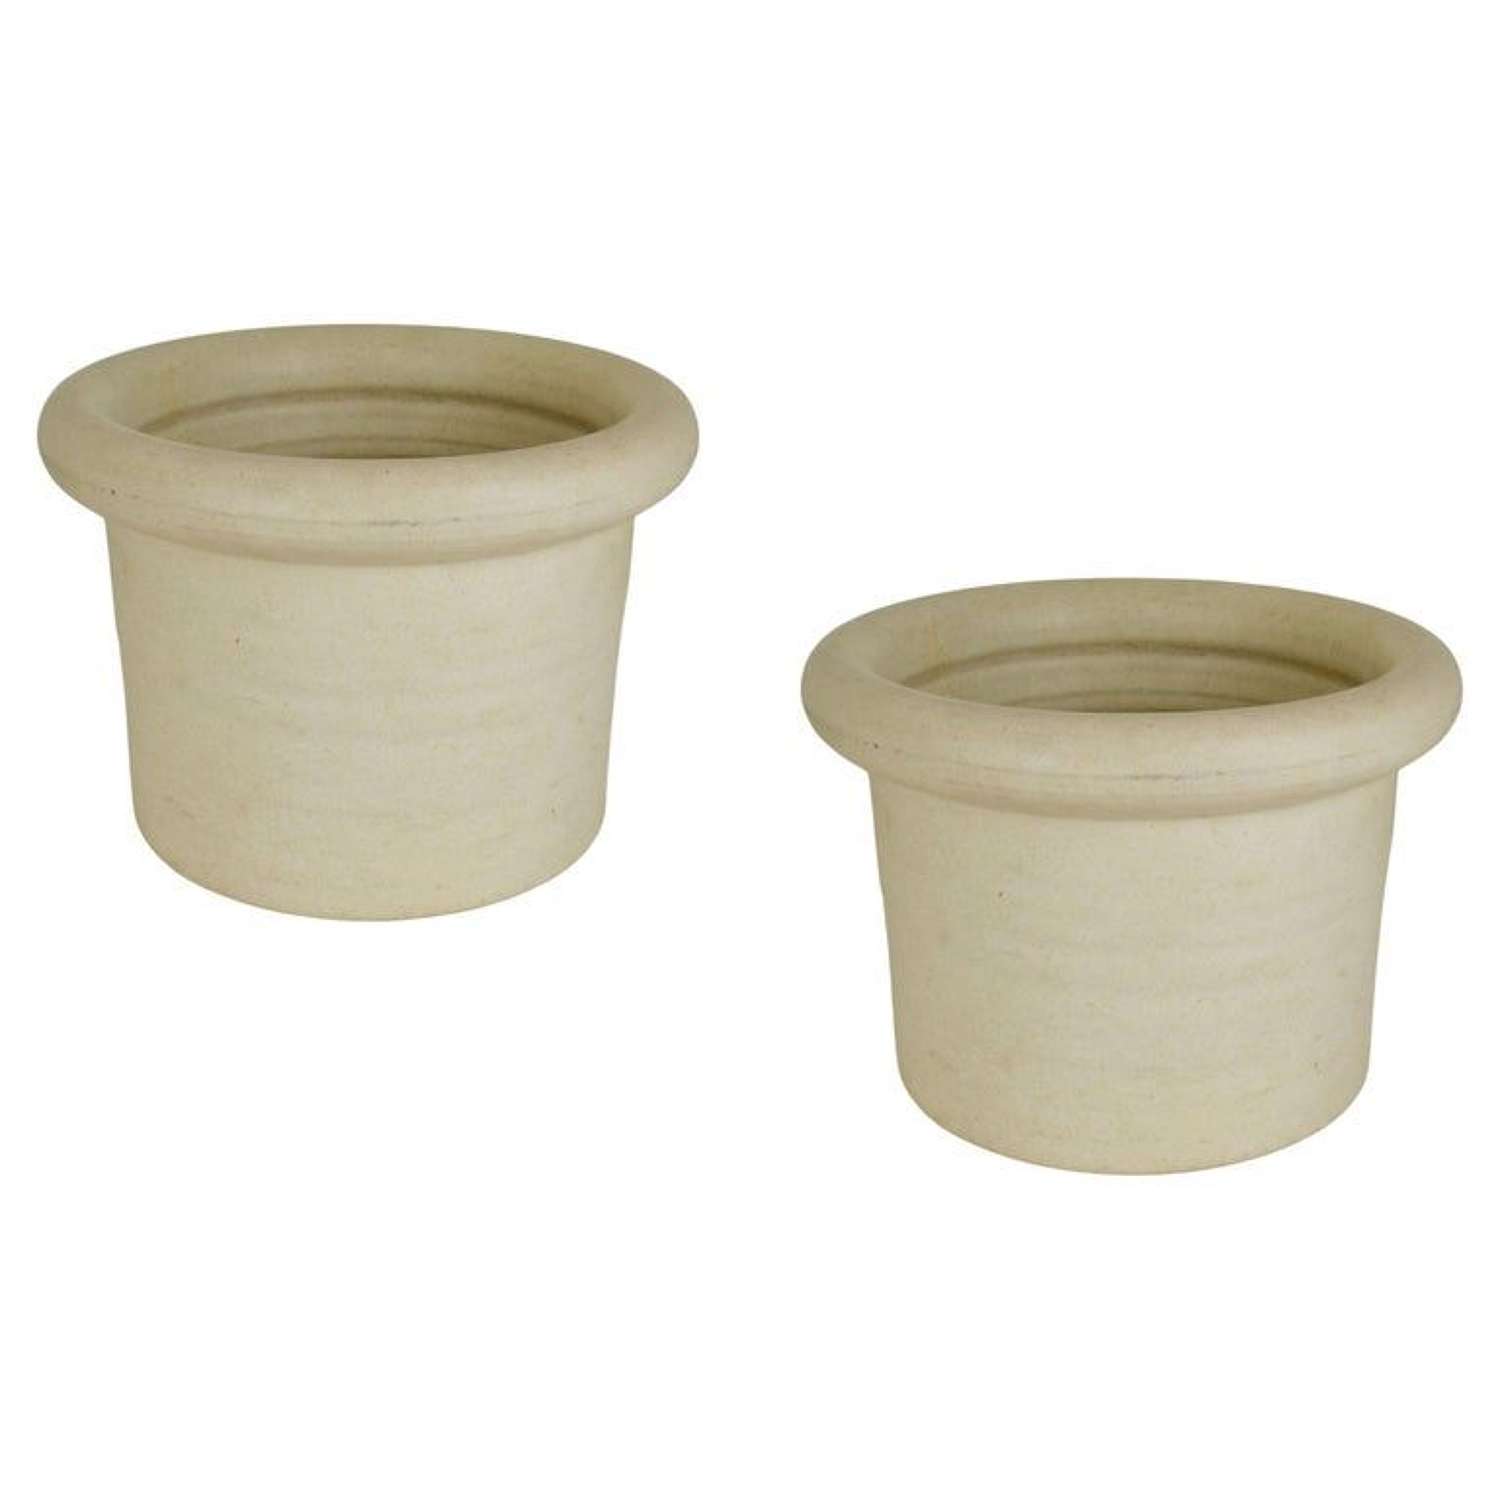 Pair of Large Cream Studio Pottery Planters by Piet Knepper for Mobach